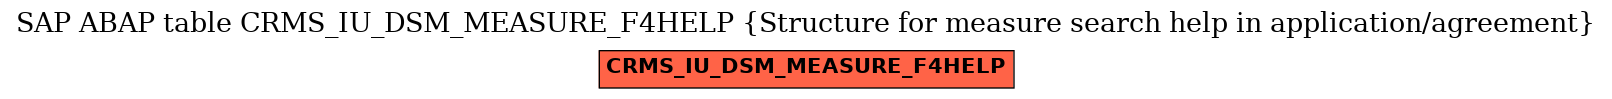 E-R Diagram for table CRMS_IU_DSM_MEASURE_F4HELP (Structure for measure search help in application/agreement)